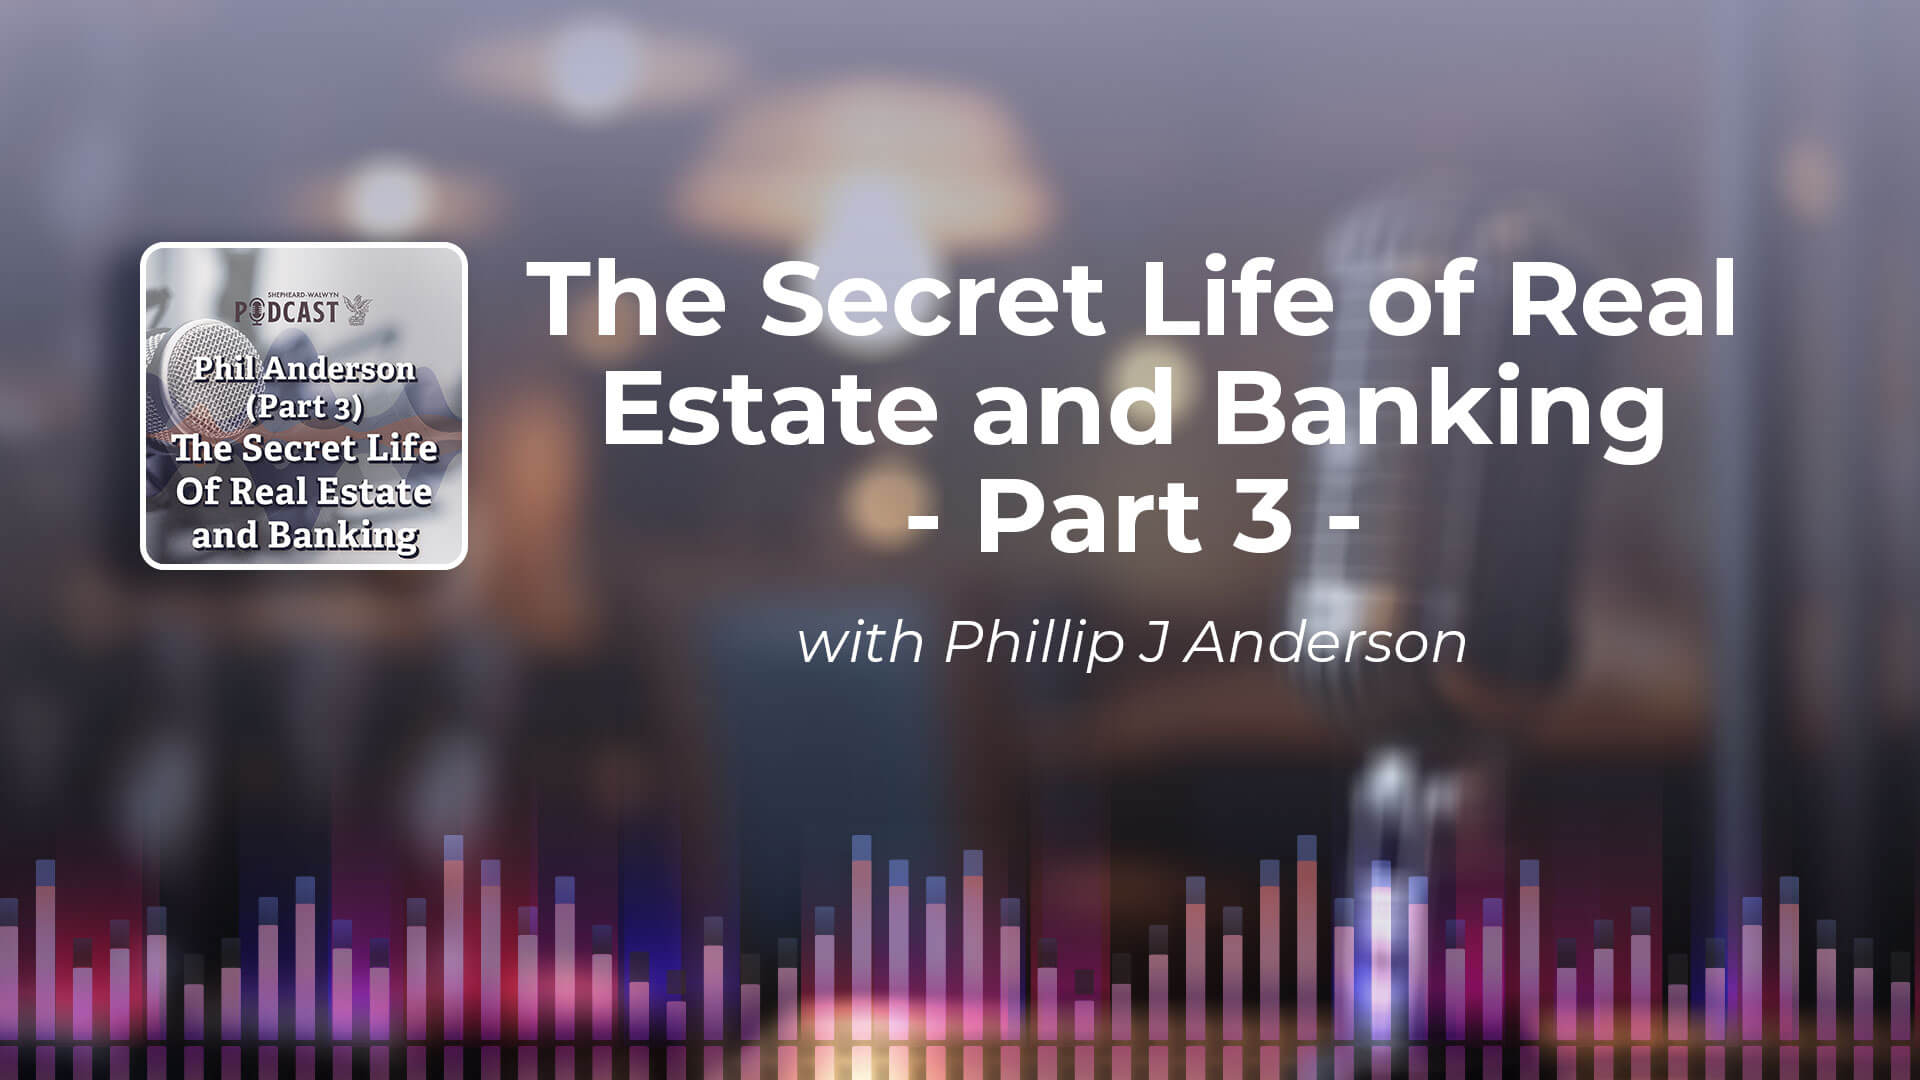 Secret Life of Banking and Real Estate - Shepheard Walwyn Podcast - Part 3